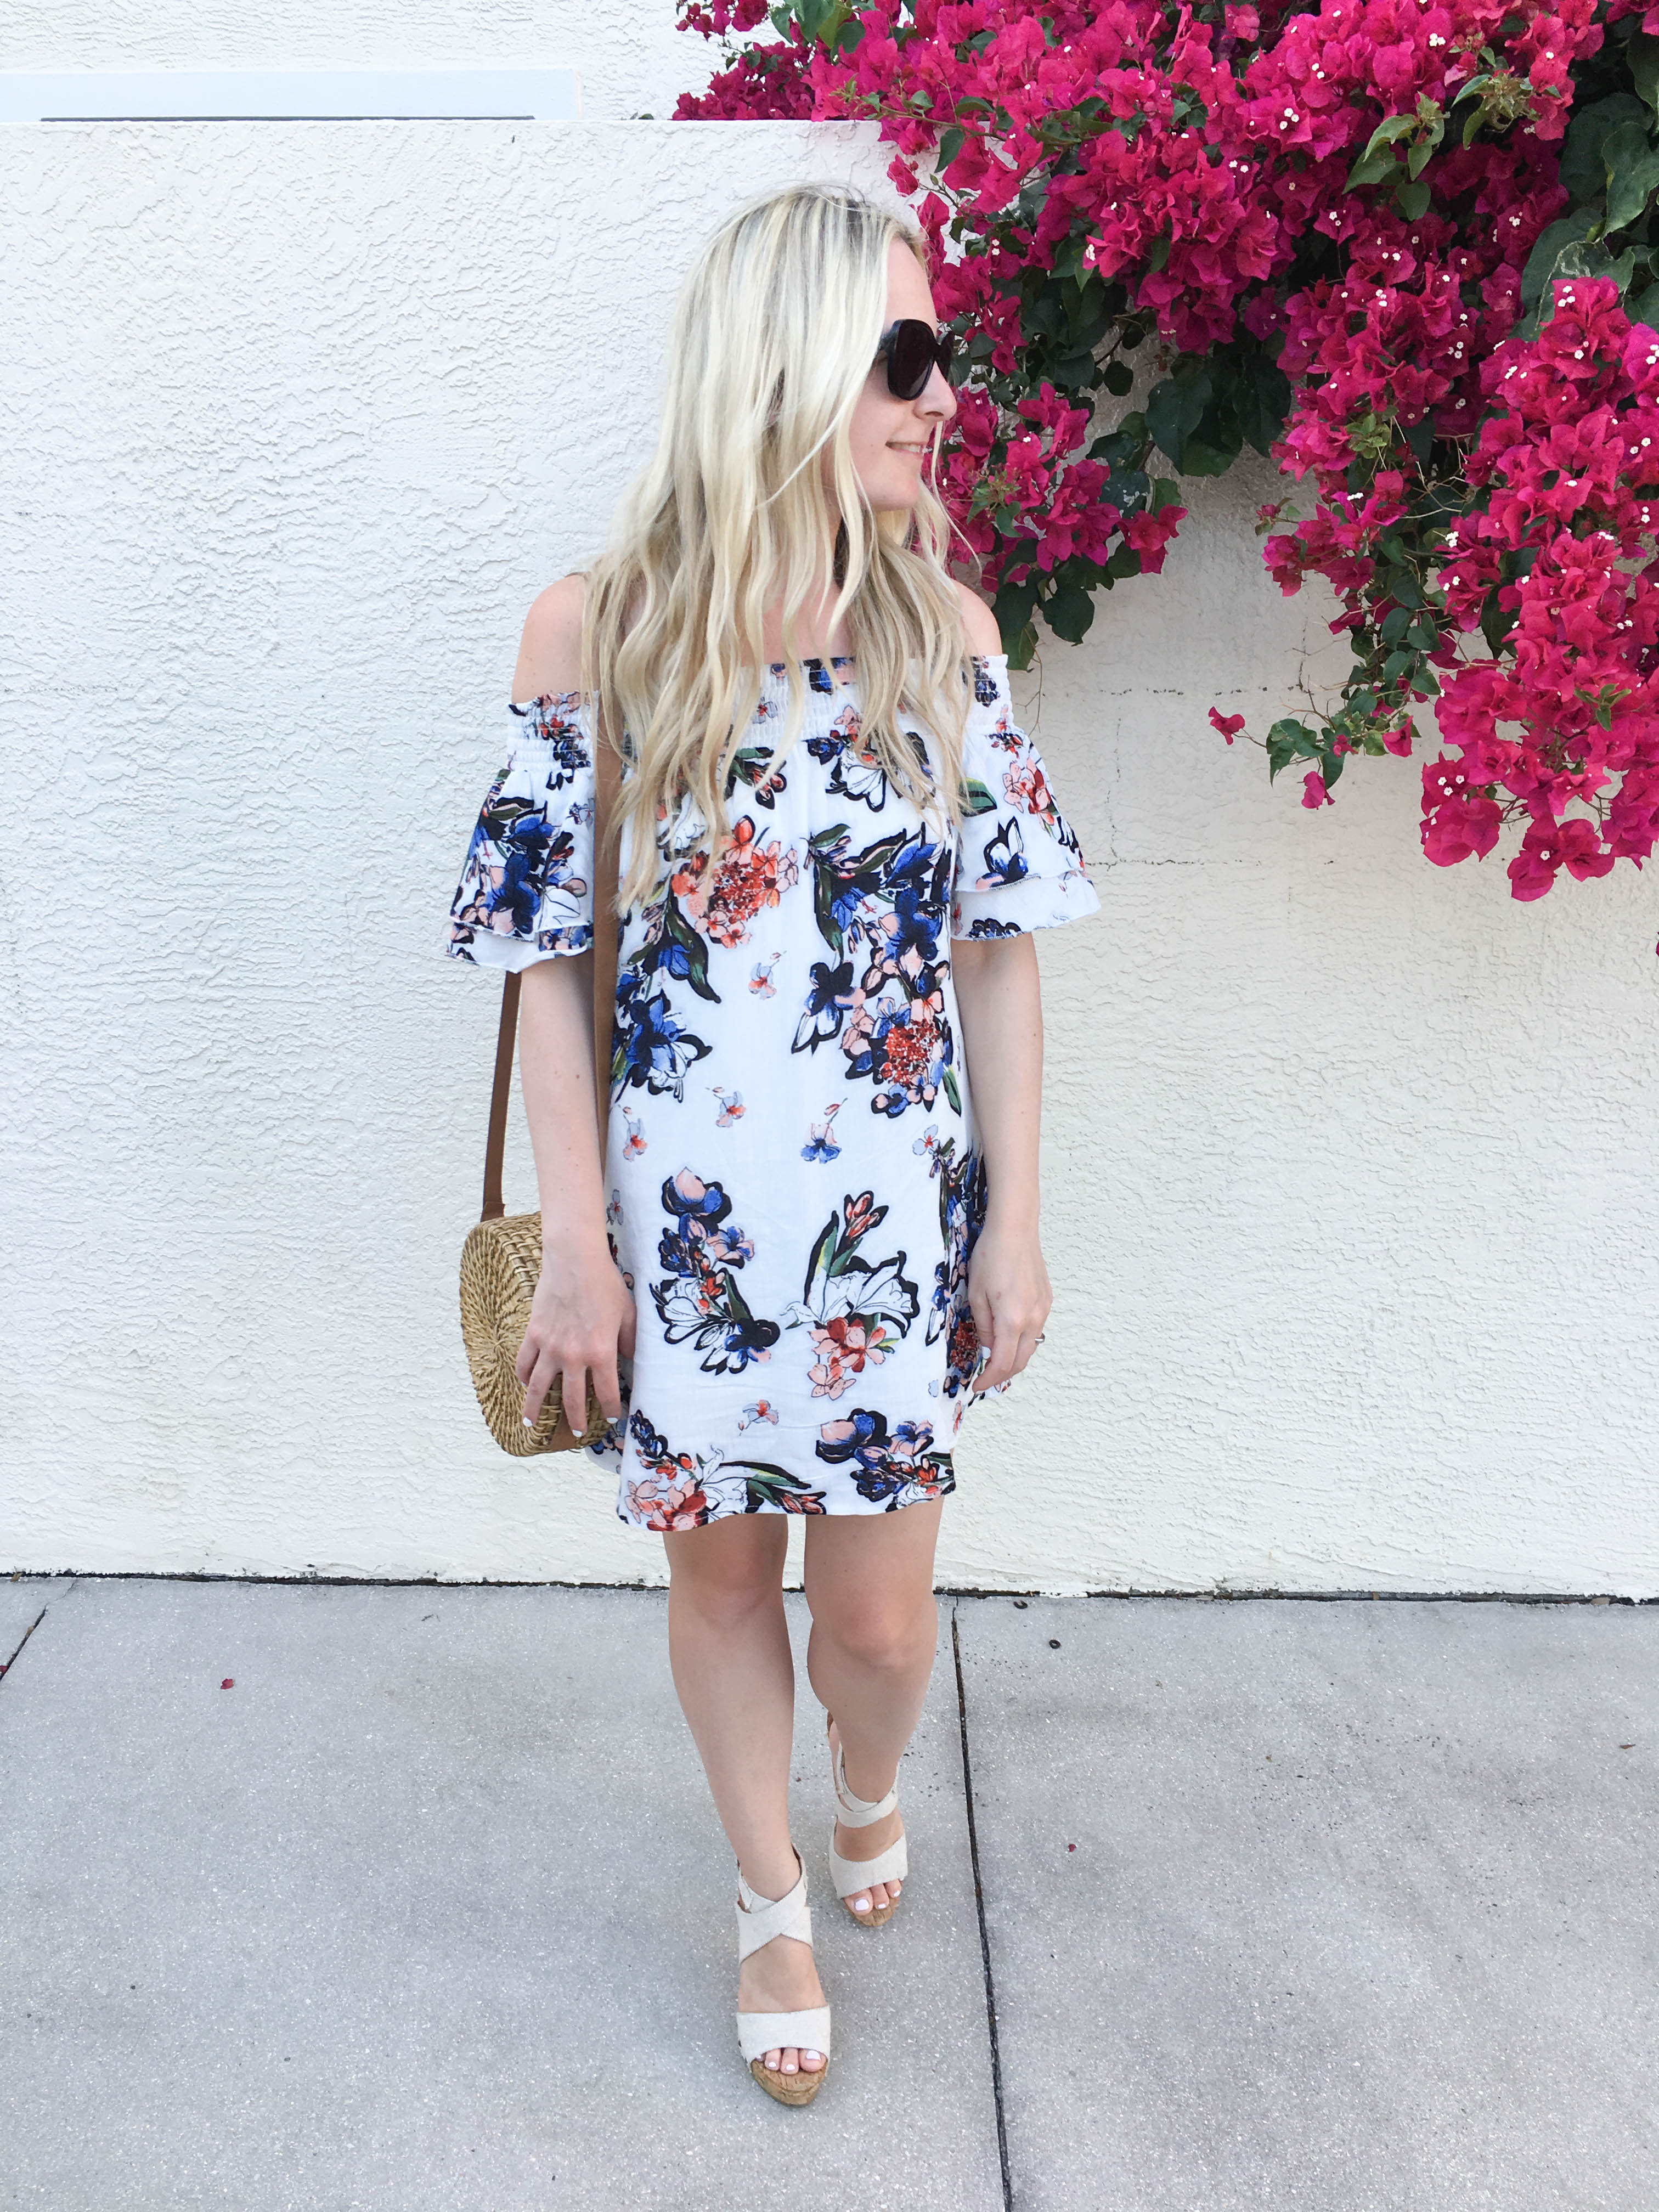 Floral Off the shoulder dress on livin' life with style